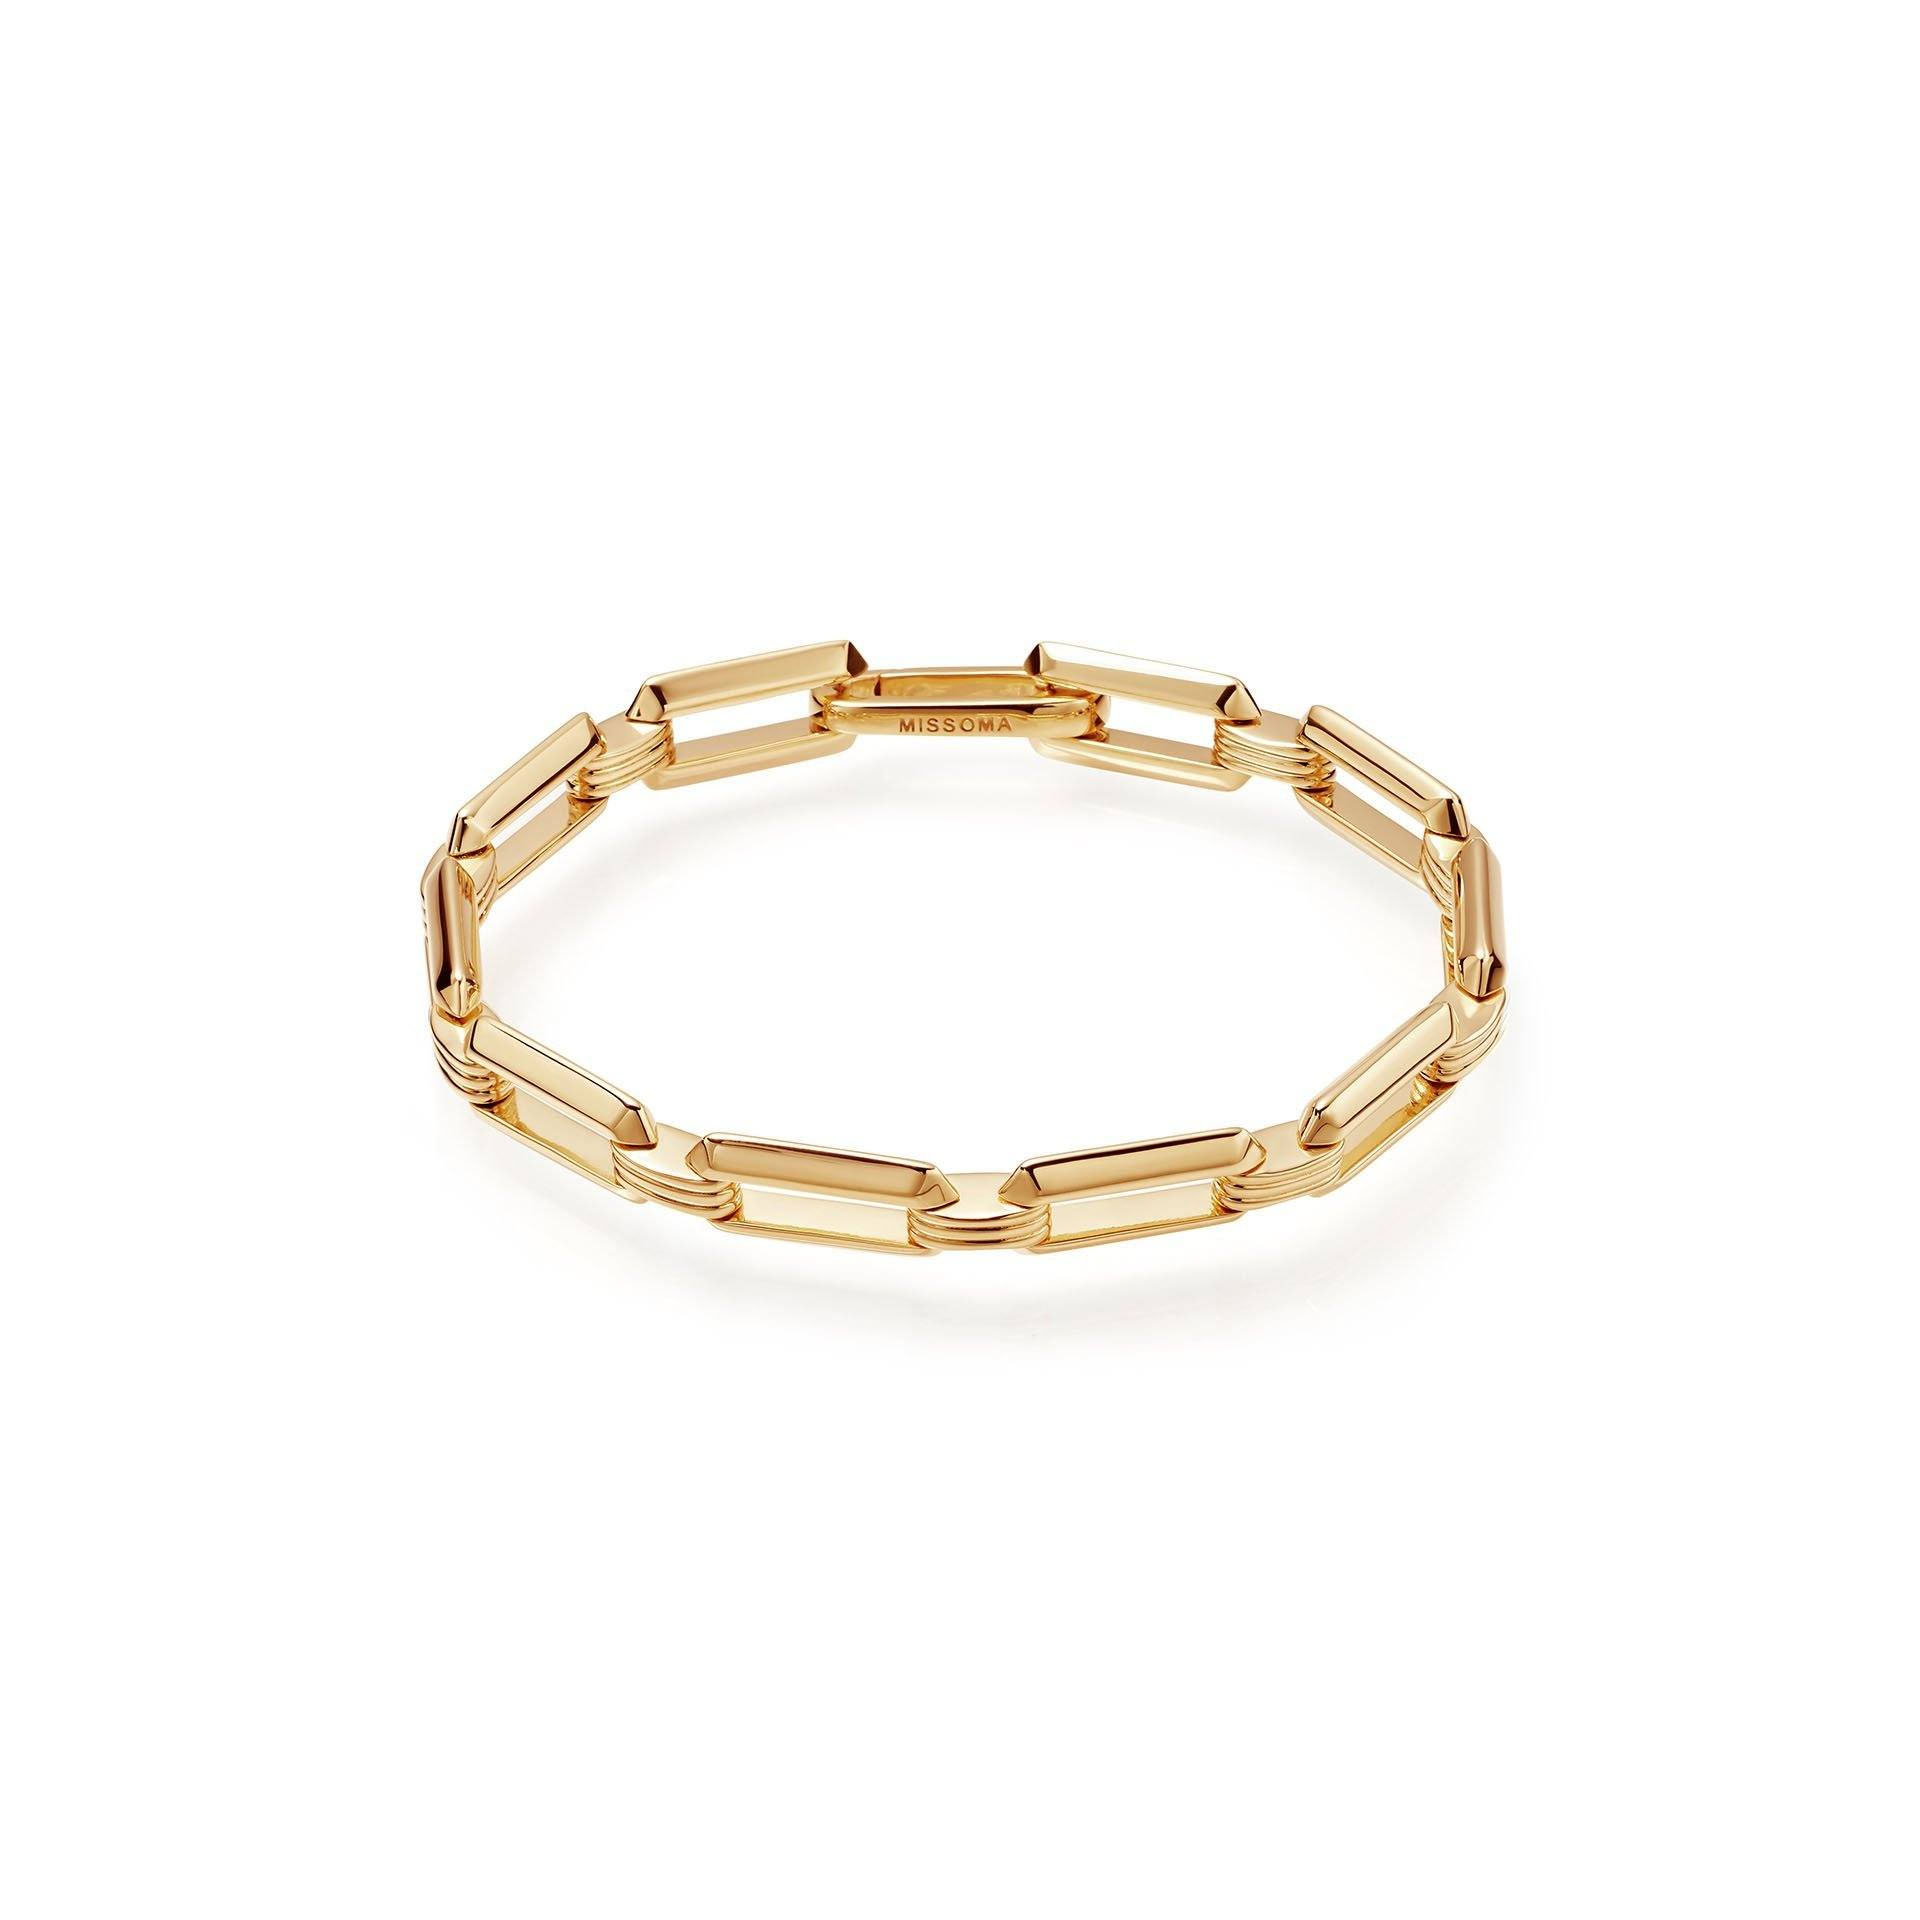 Wholesale OEM/ODM Jewelry OEM chain bracelets 18ct Gold Plated on Brass offer your ideas and designs